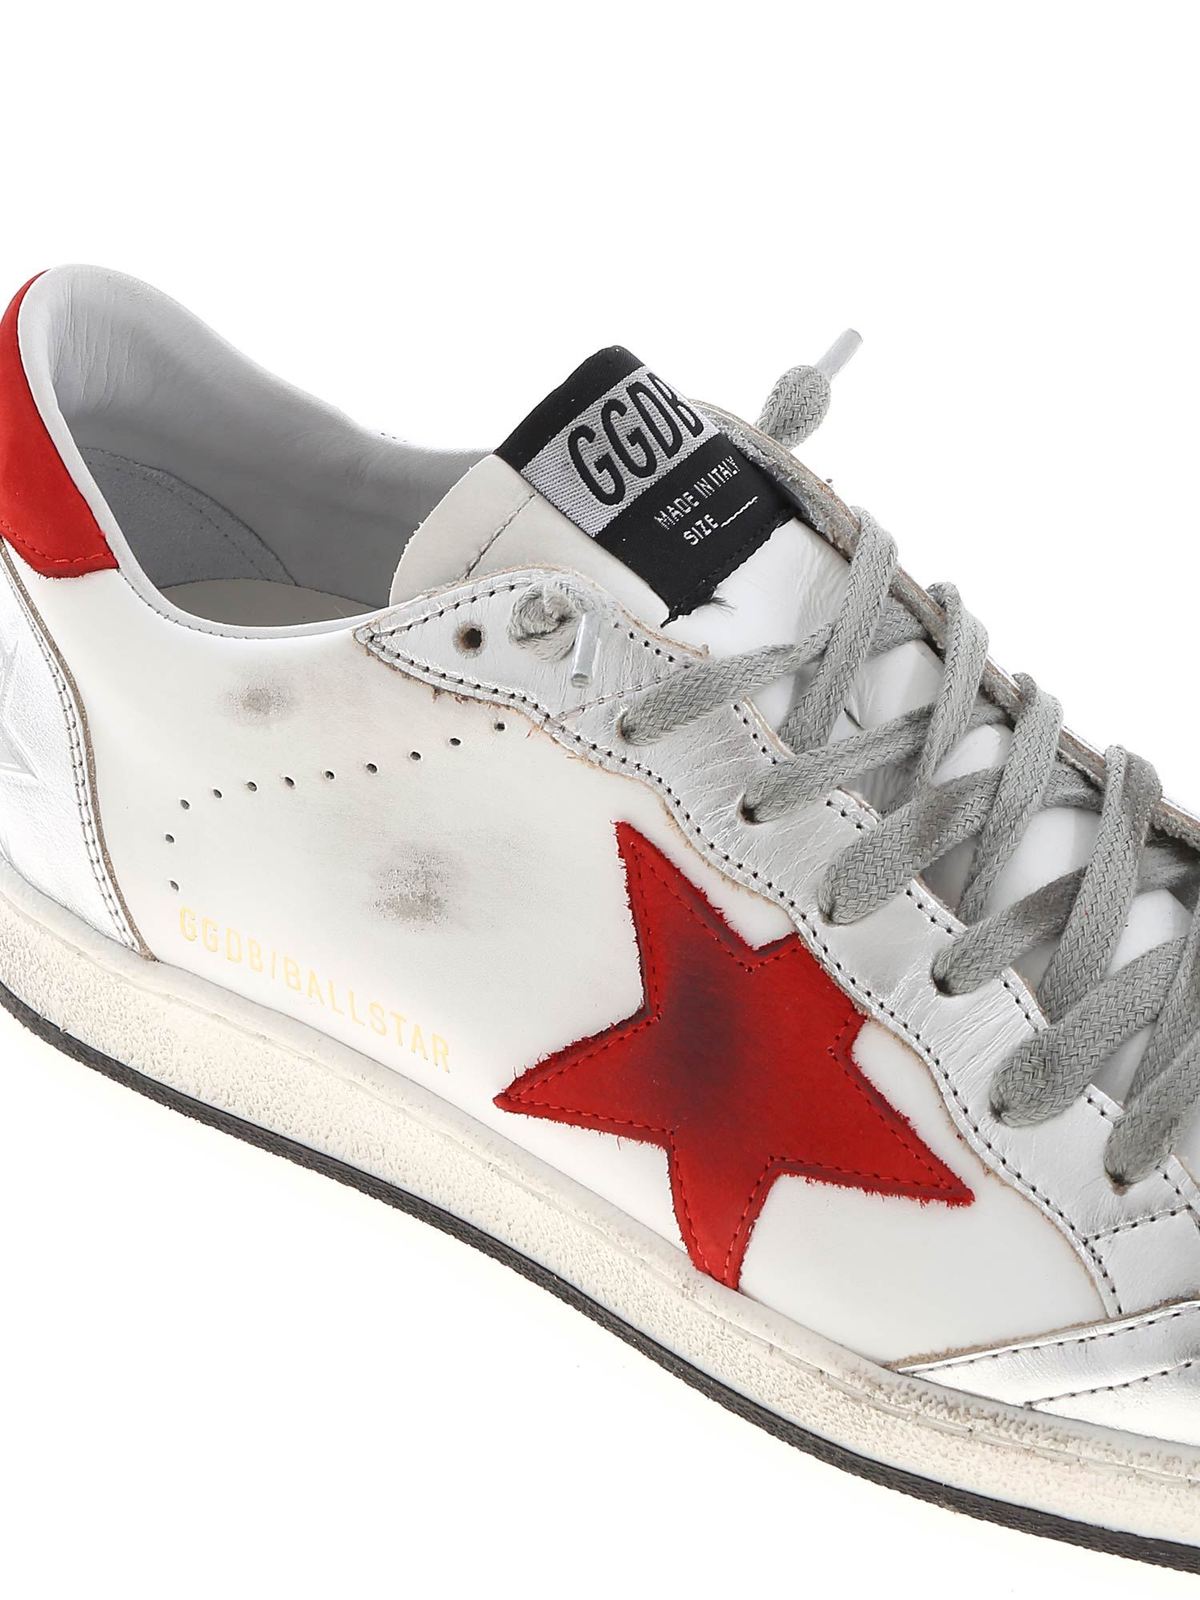 Trainers Golden Goose - Ball Star sneakers in white with red star -  G36MS592A56